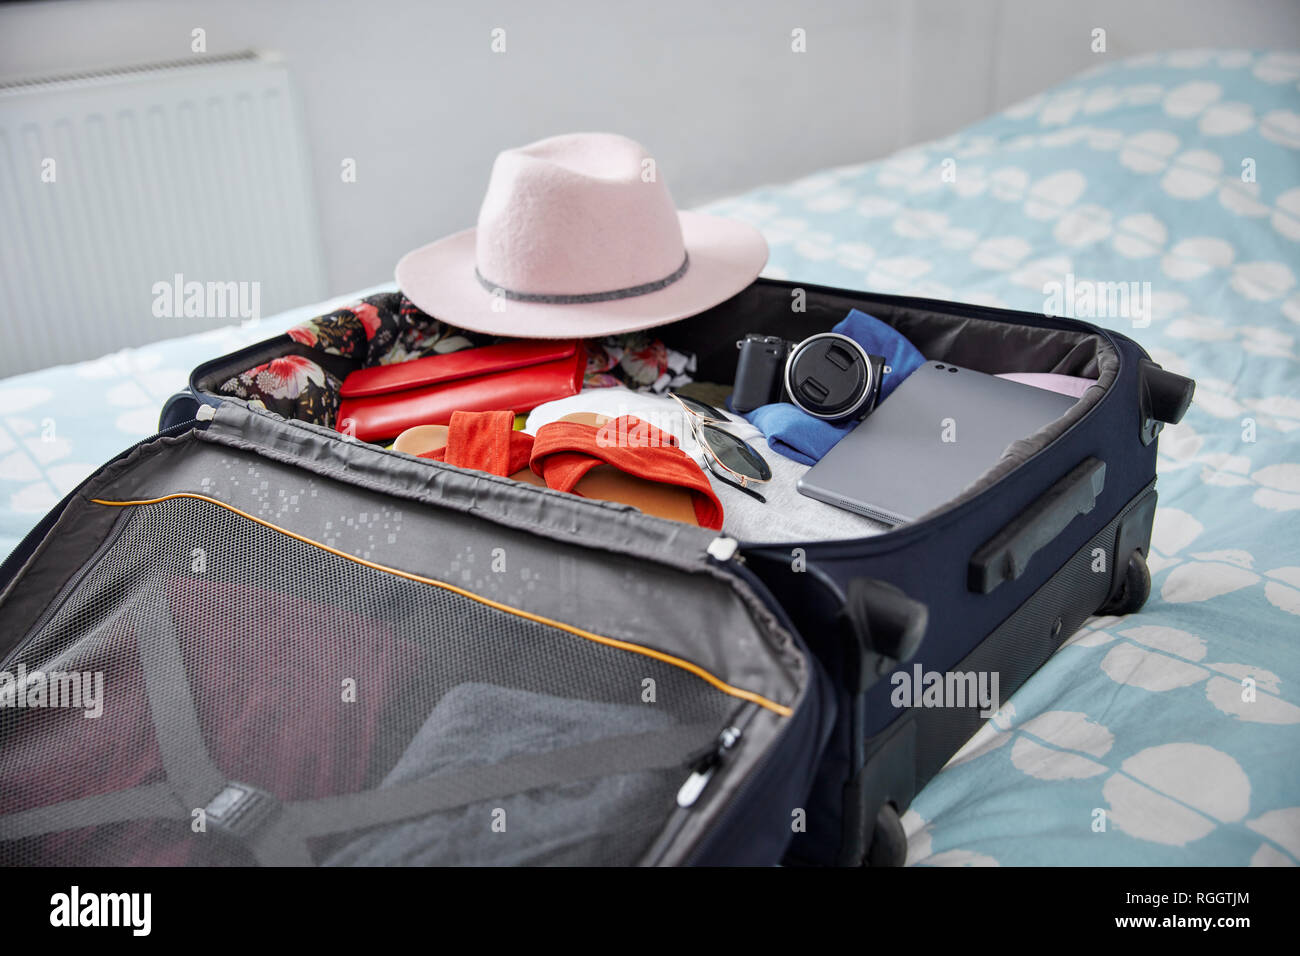 Suitcase with summer vacation utensils on bed Stock Photo